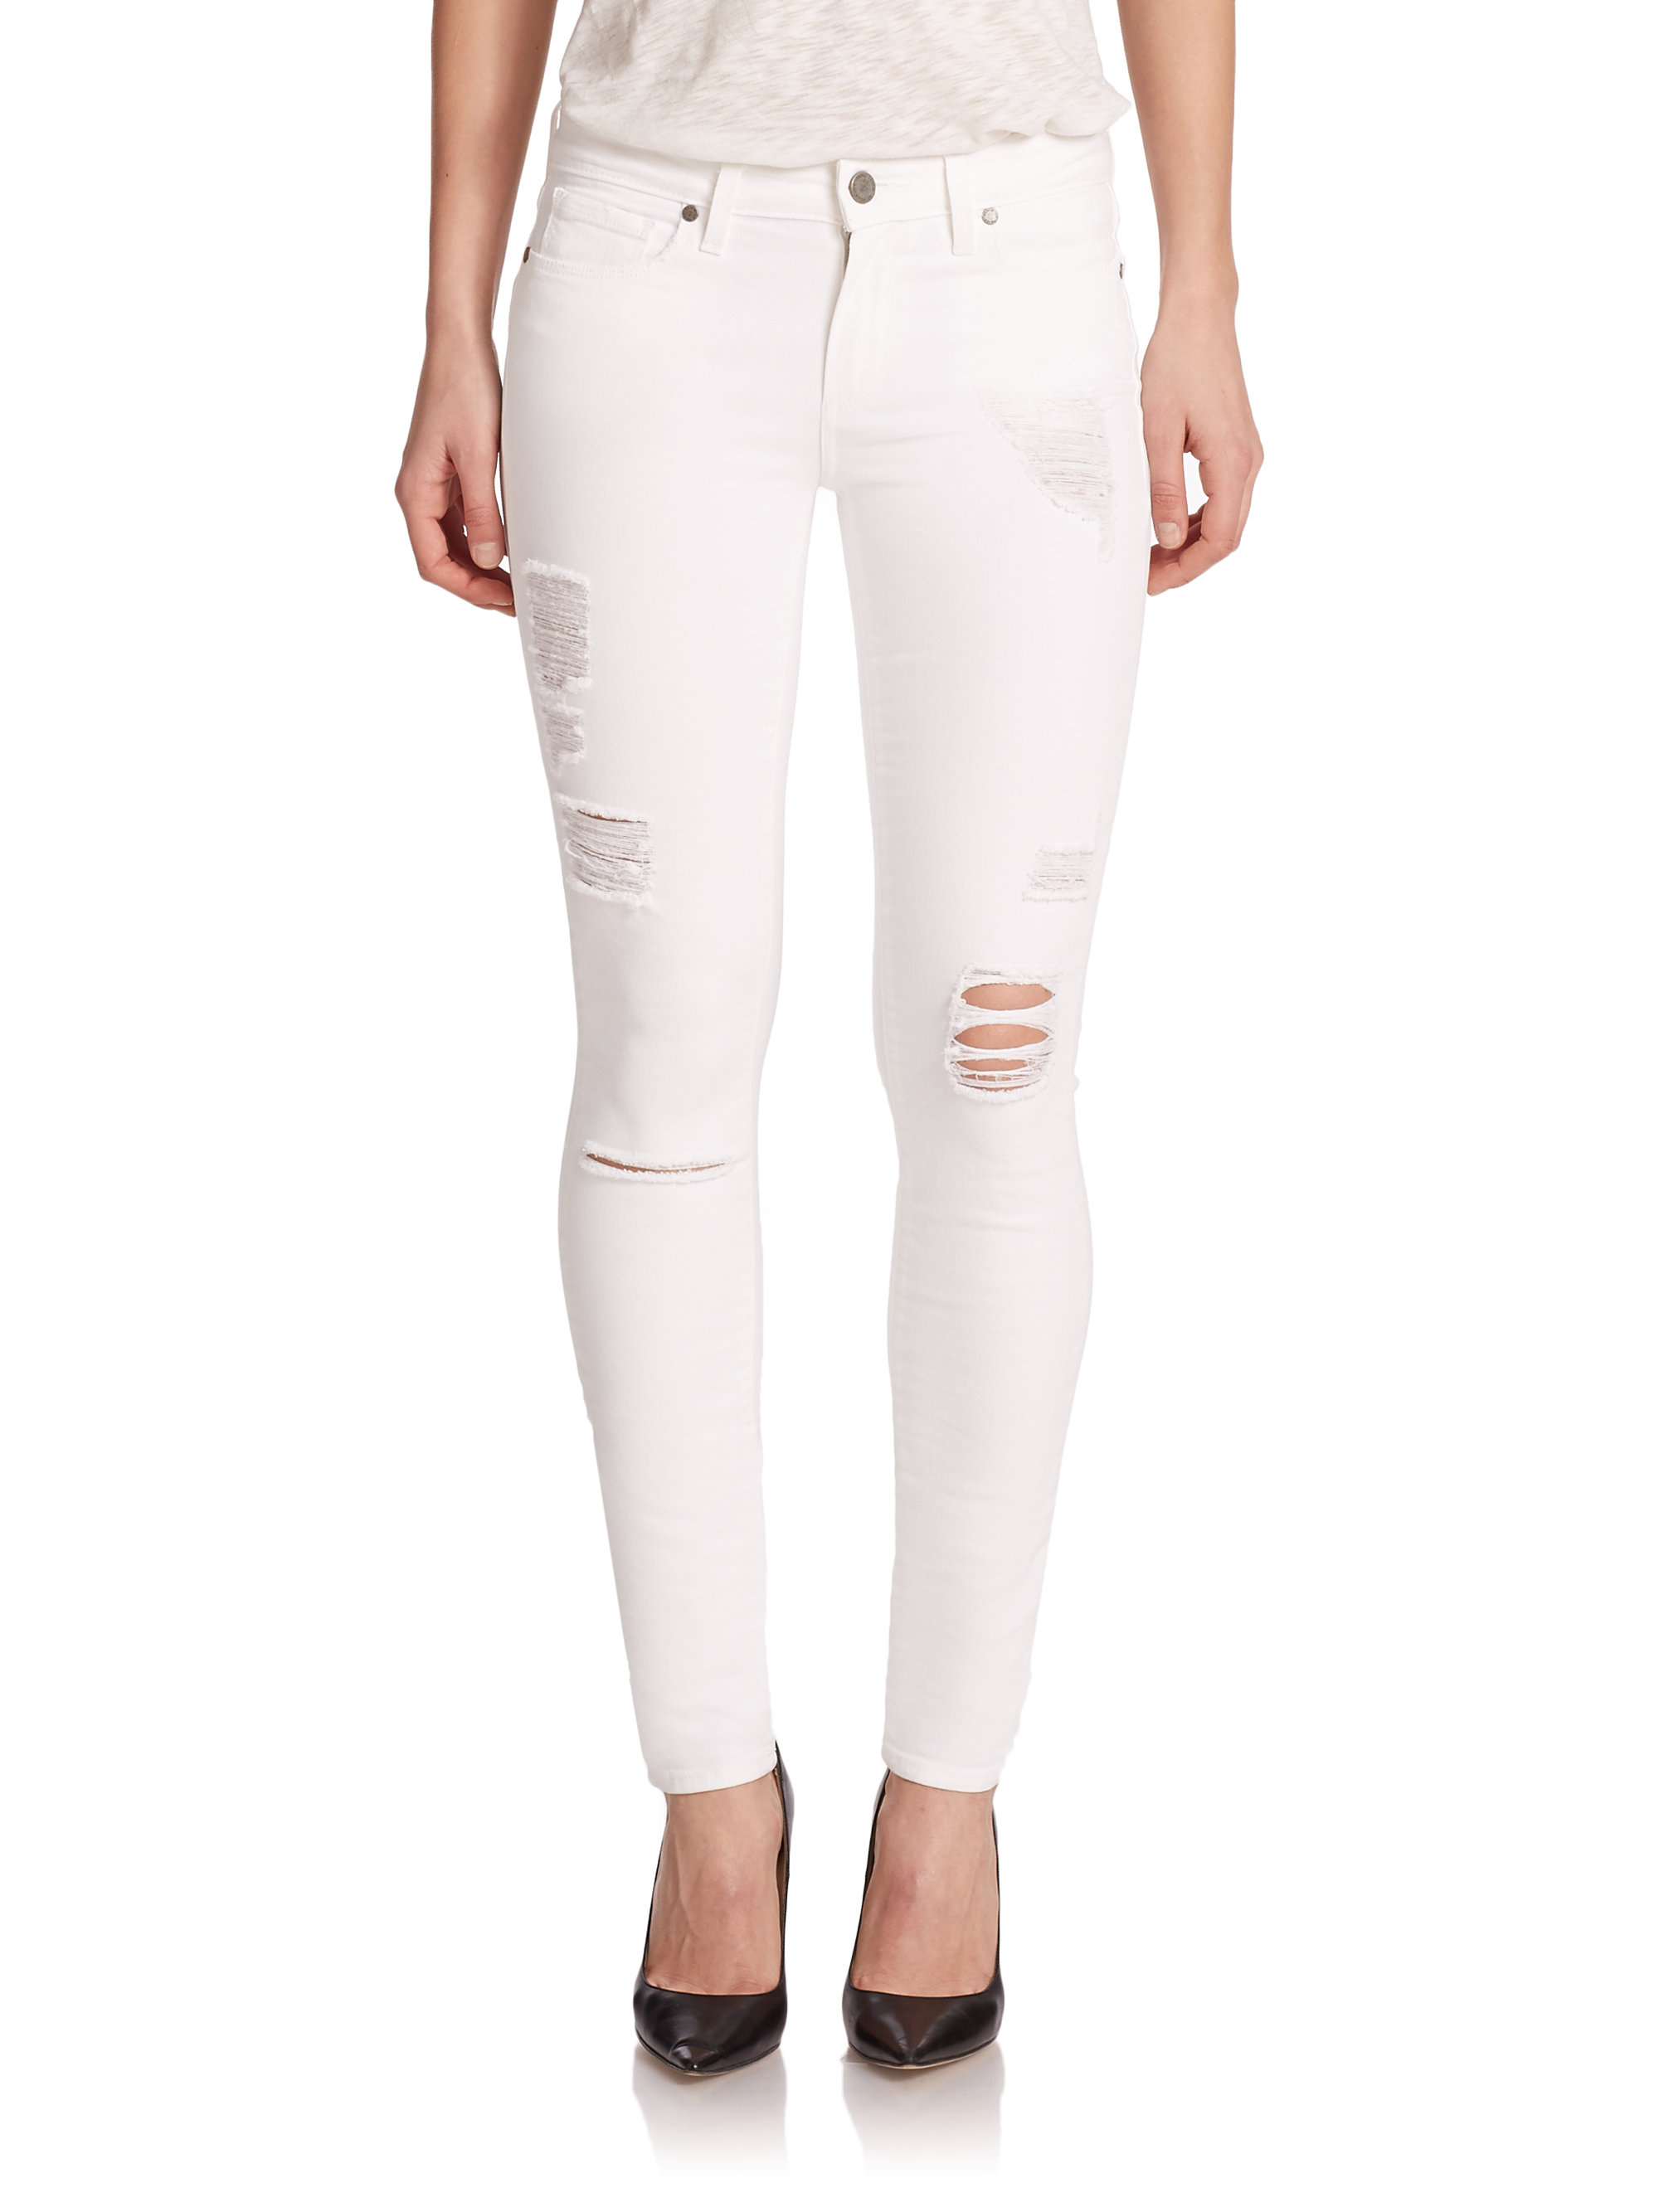 Paige White Verdugo Distressed Skinny Jeans Product 1 27791519 2 627477194 Normal 